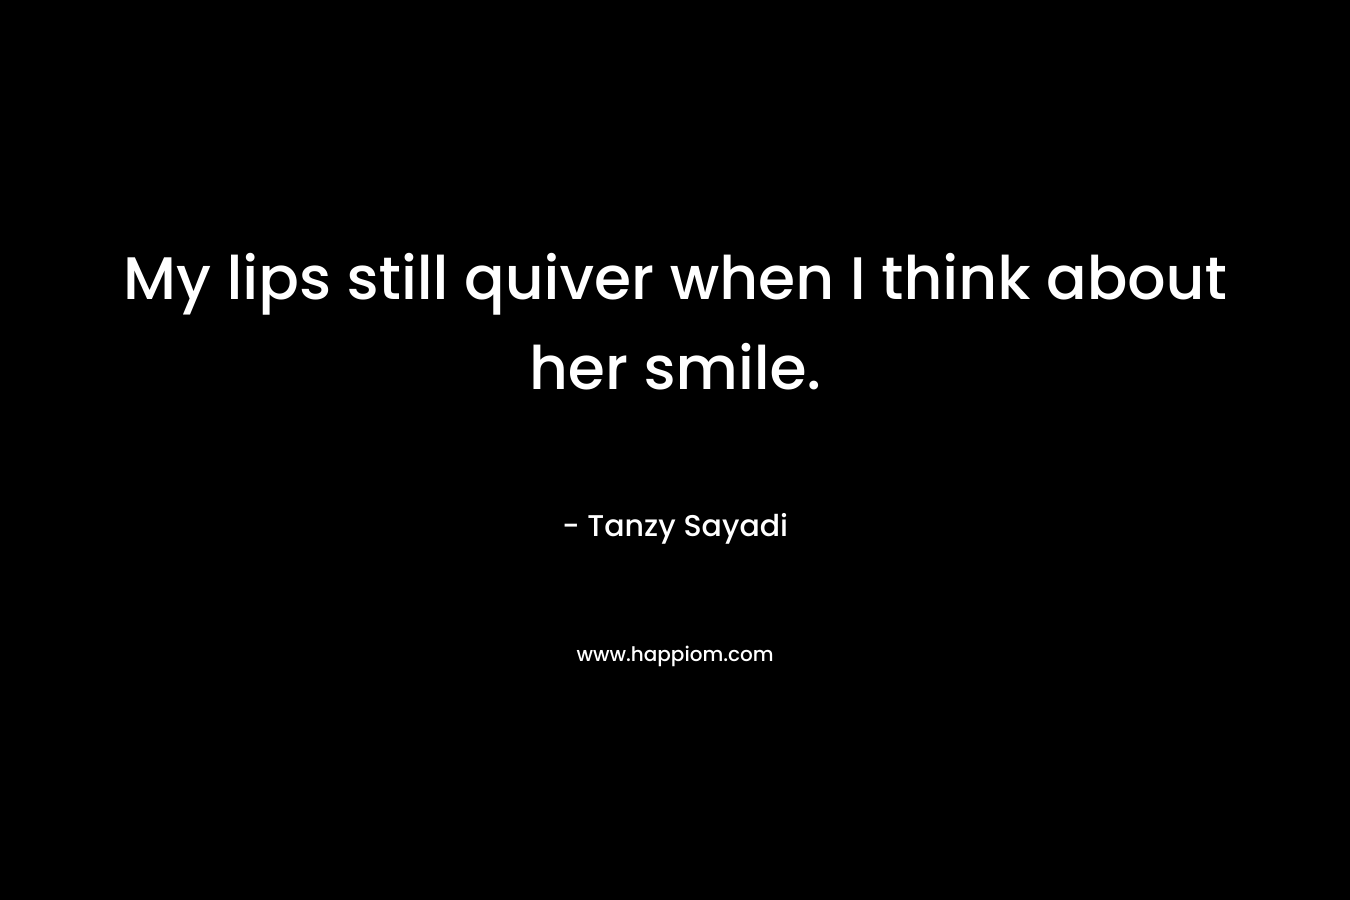 My lips still quiver when I think about her smile. – Tanzy Sayadi